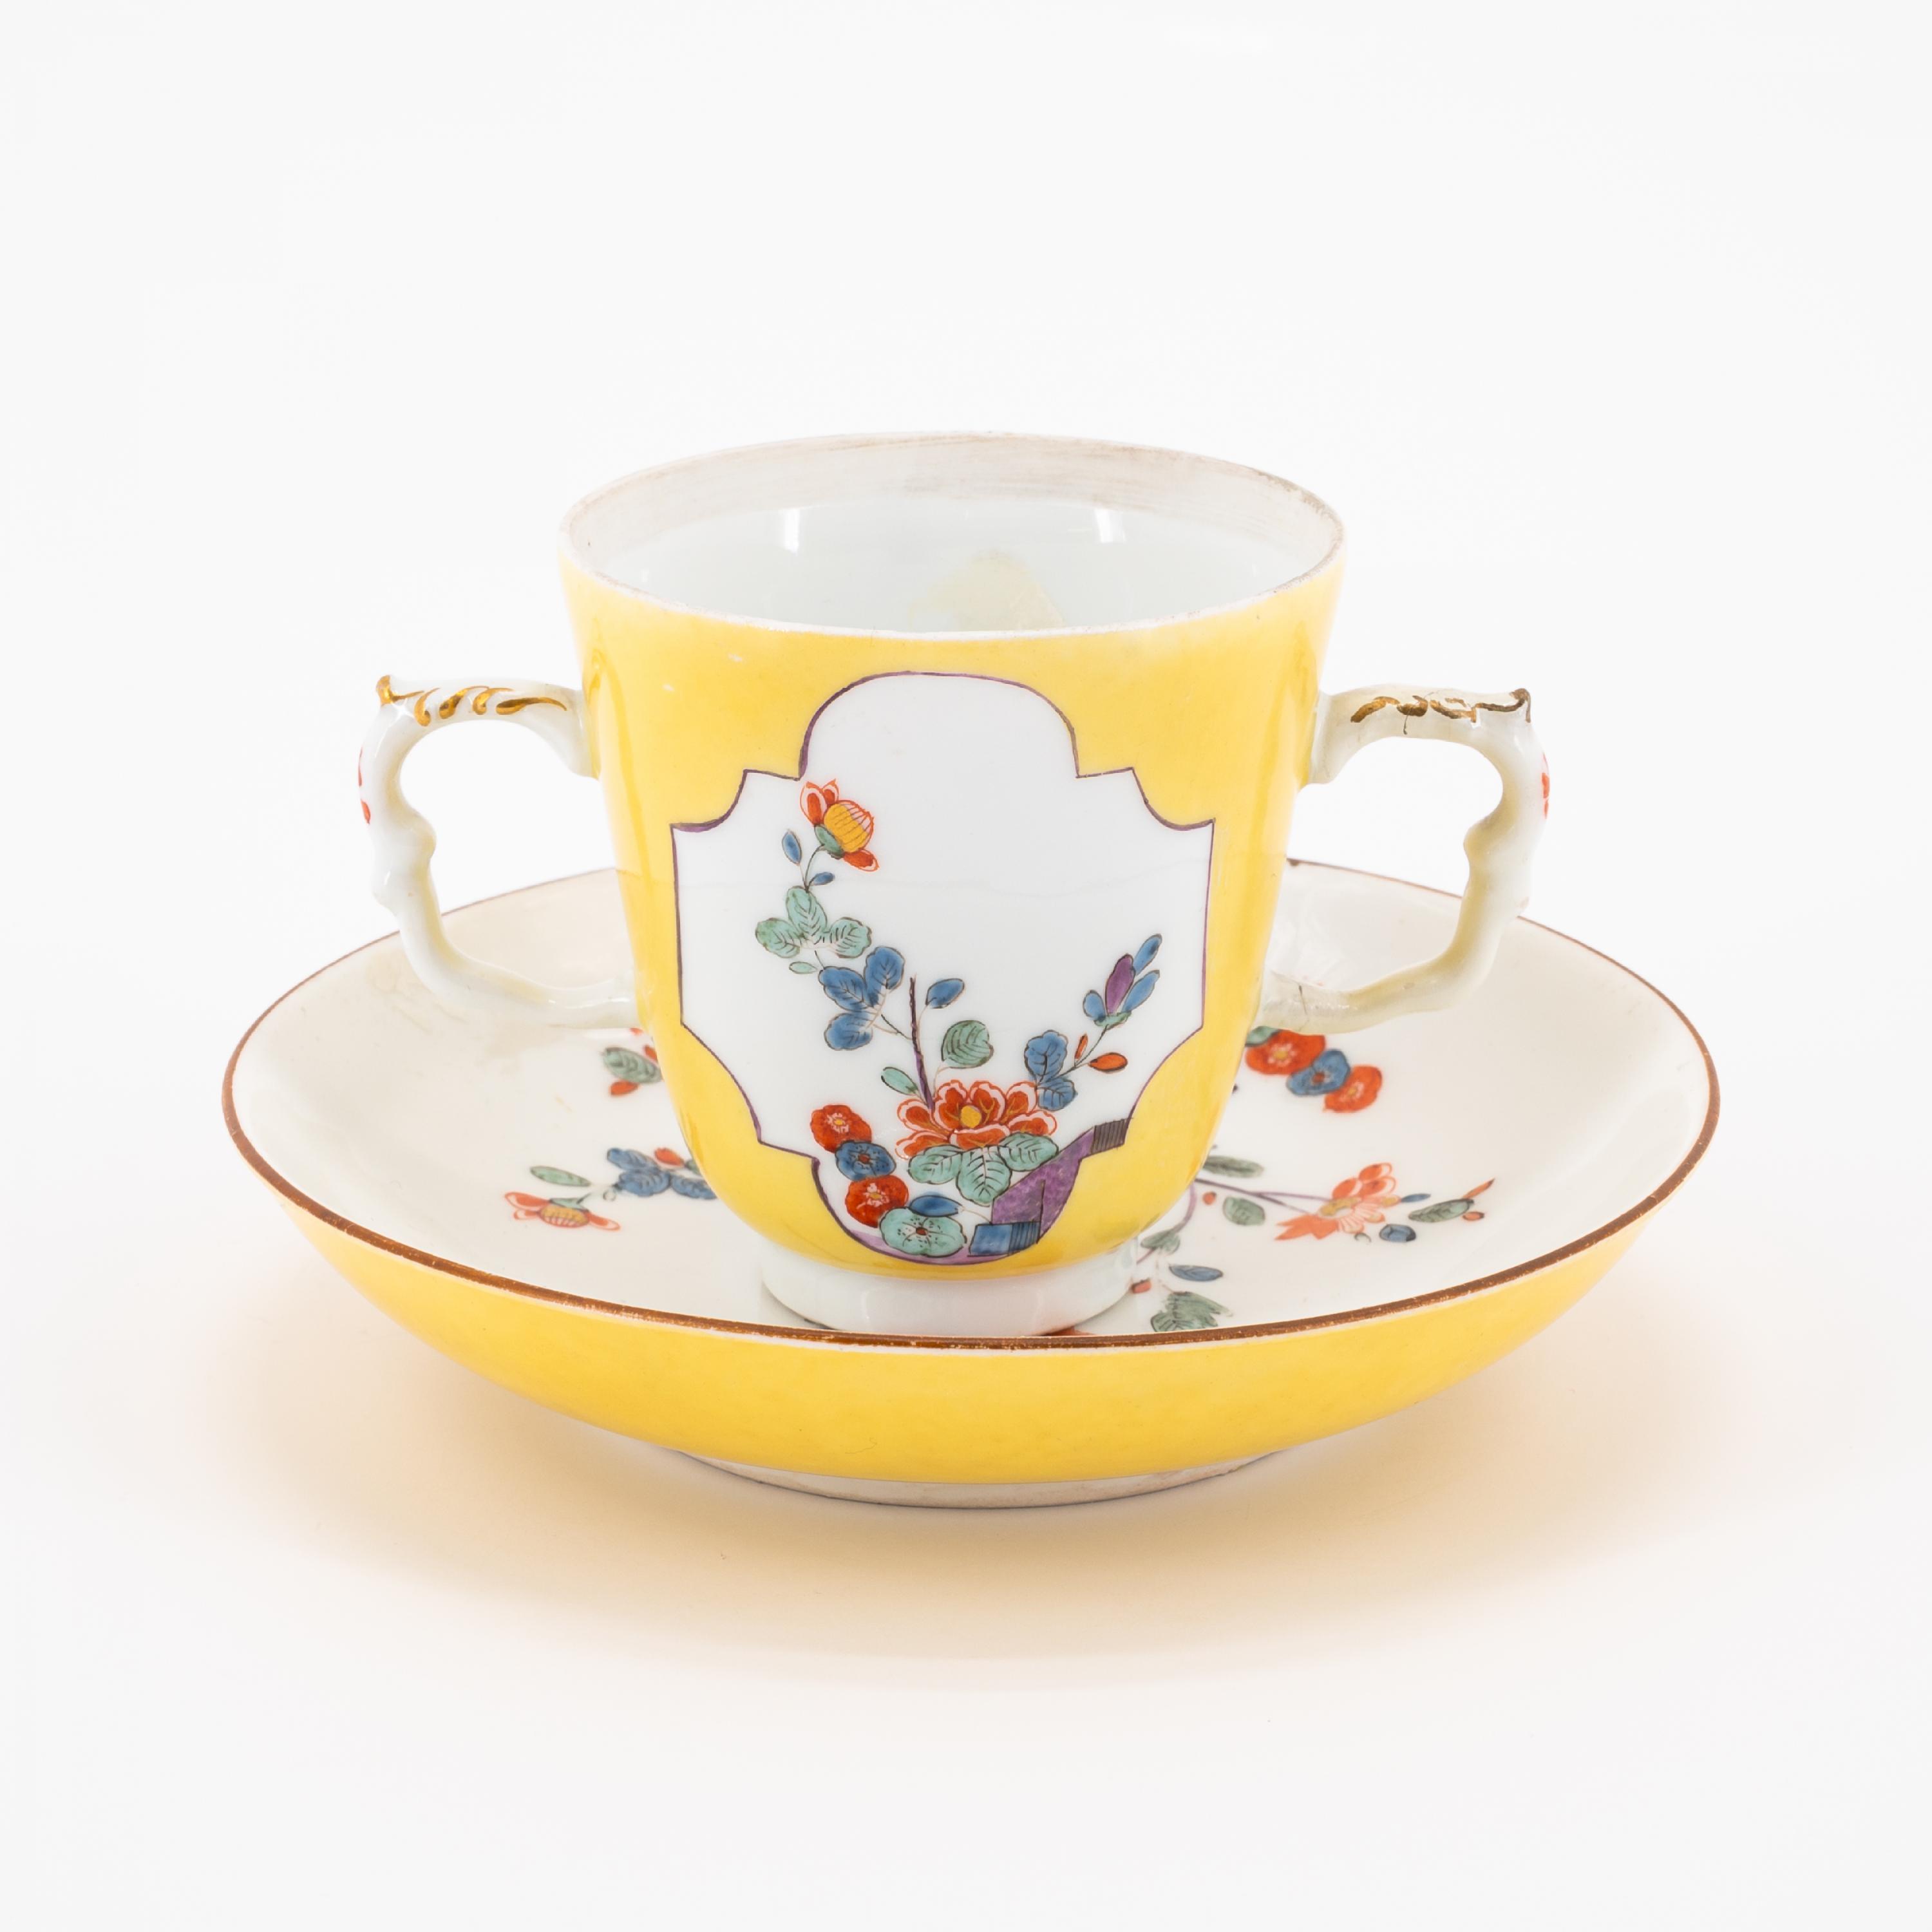 TWO PORCELAIN CUP WITH DOUBLE HANDLES & SAUCERS WITH KAKIEMON DECOR AND YELLOW GROUND - Image 8 of 11